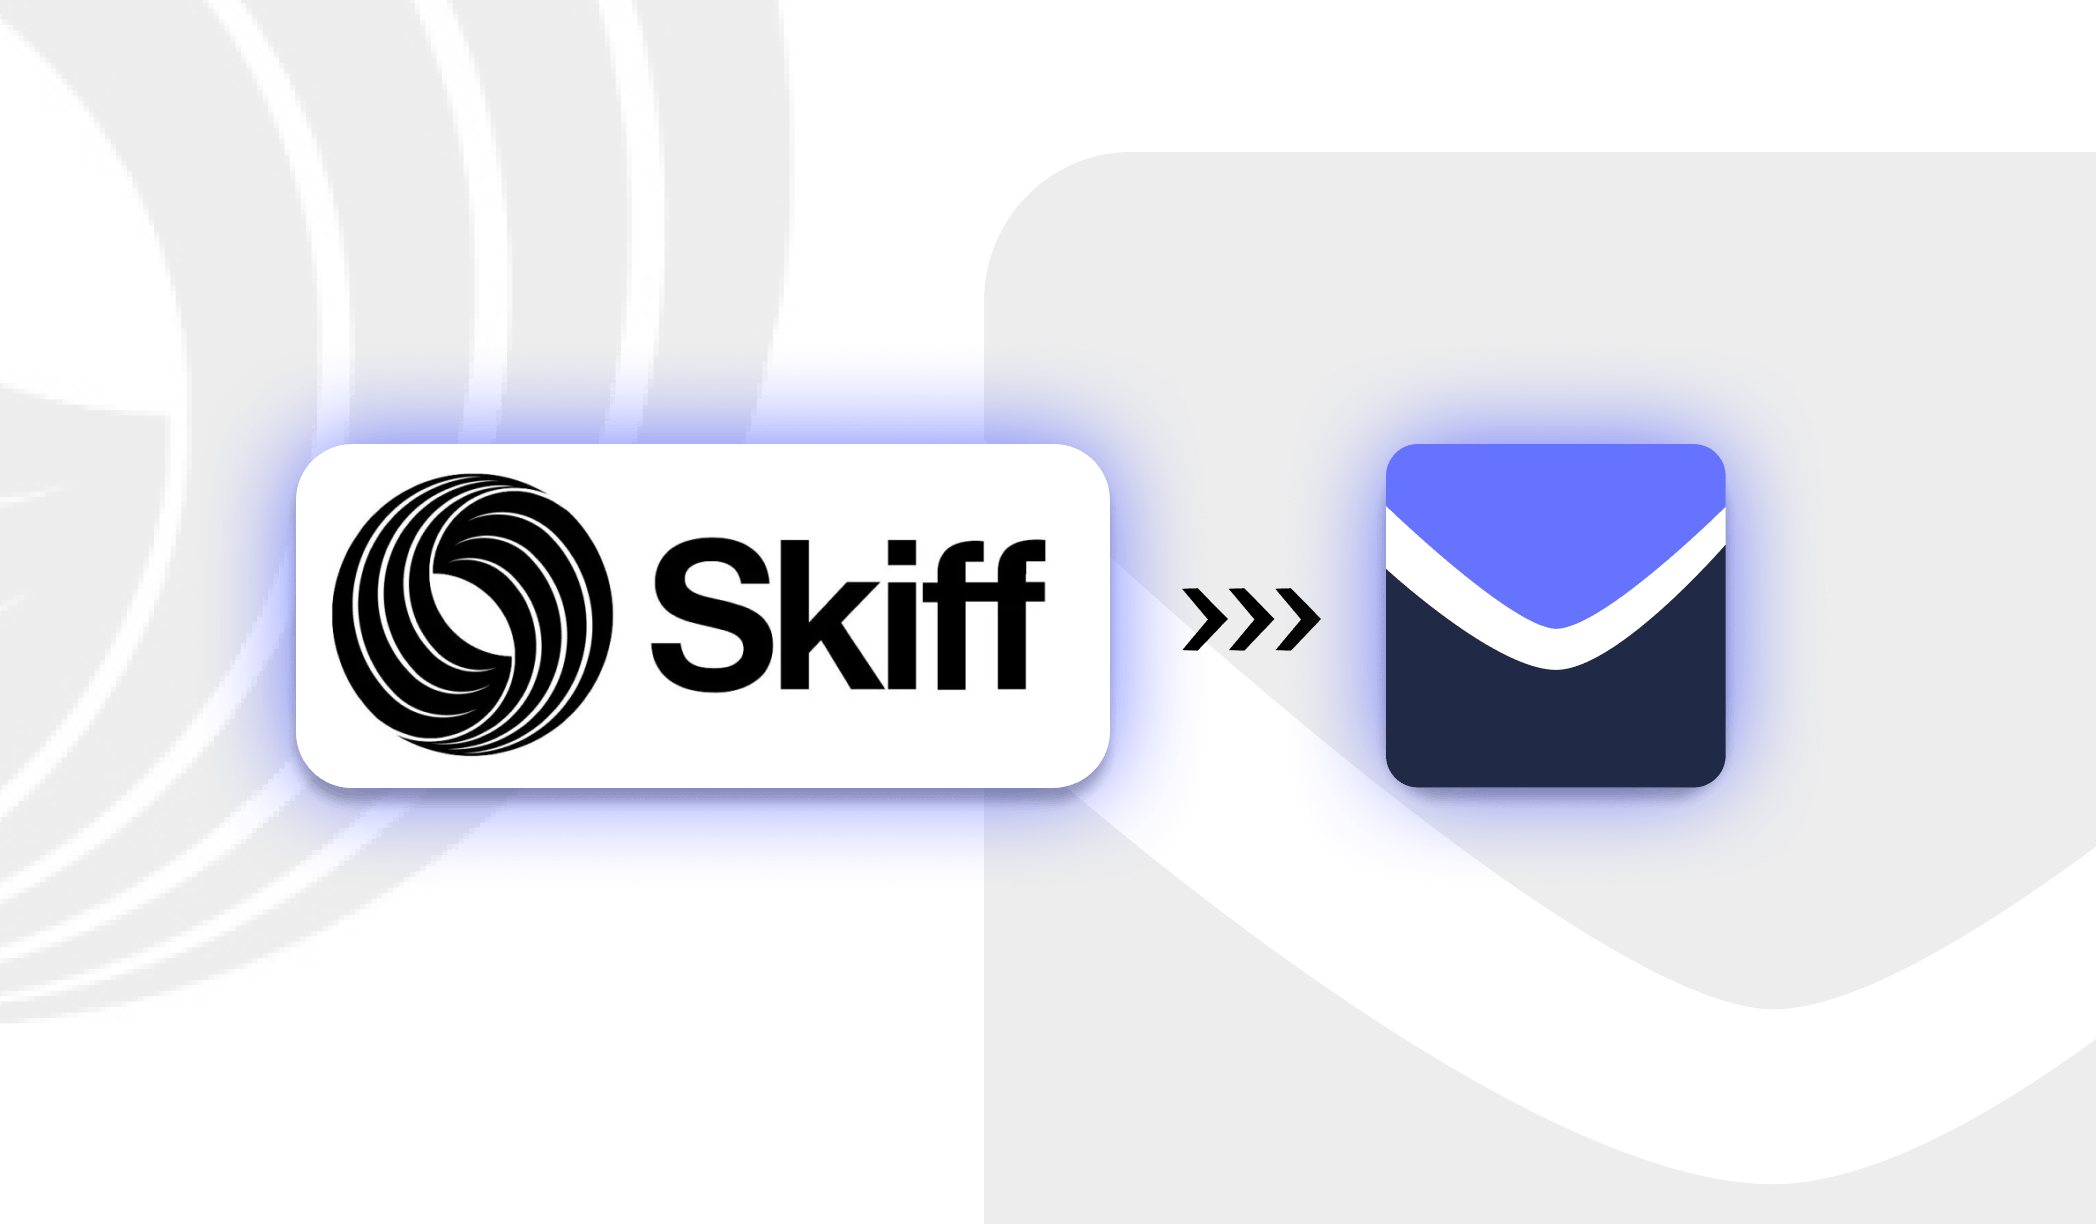 The Skiff logo migrating to the StartMail logo